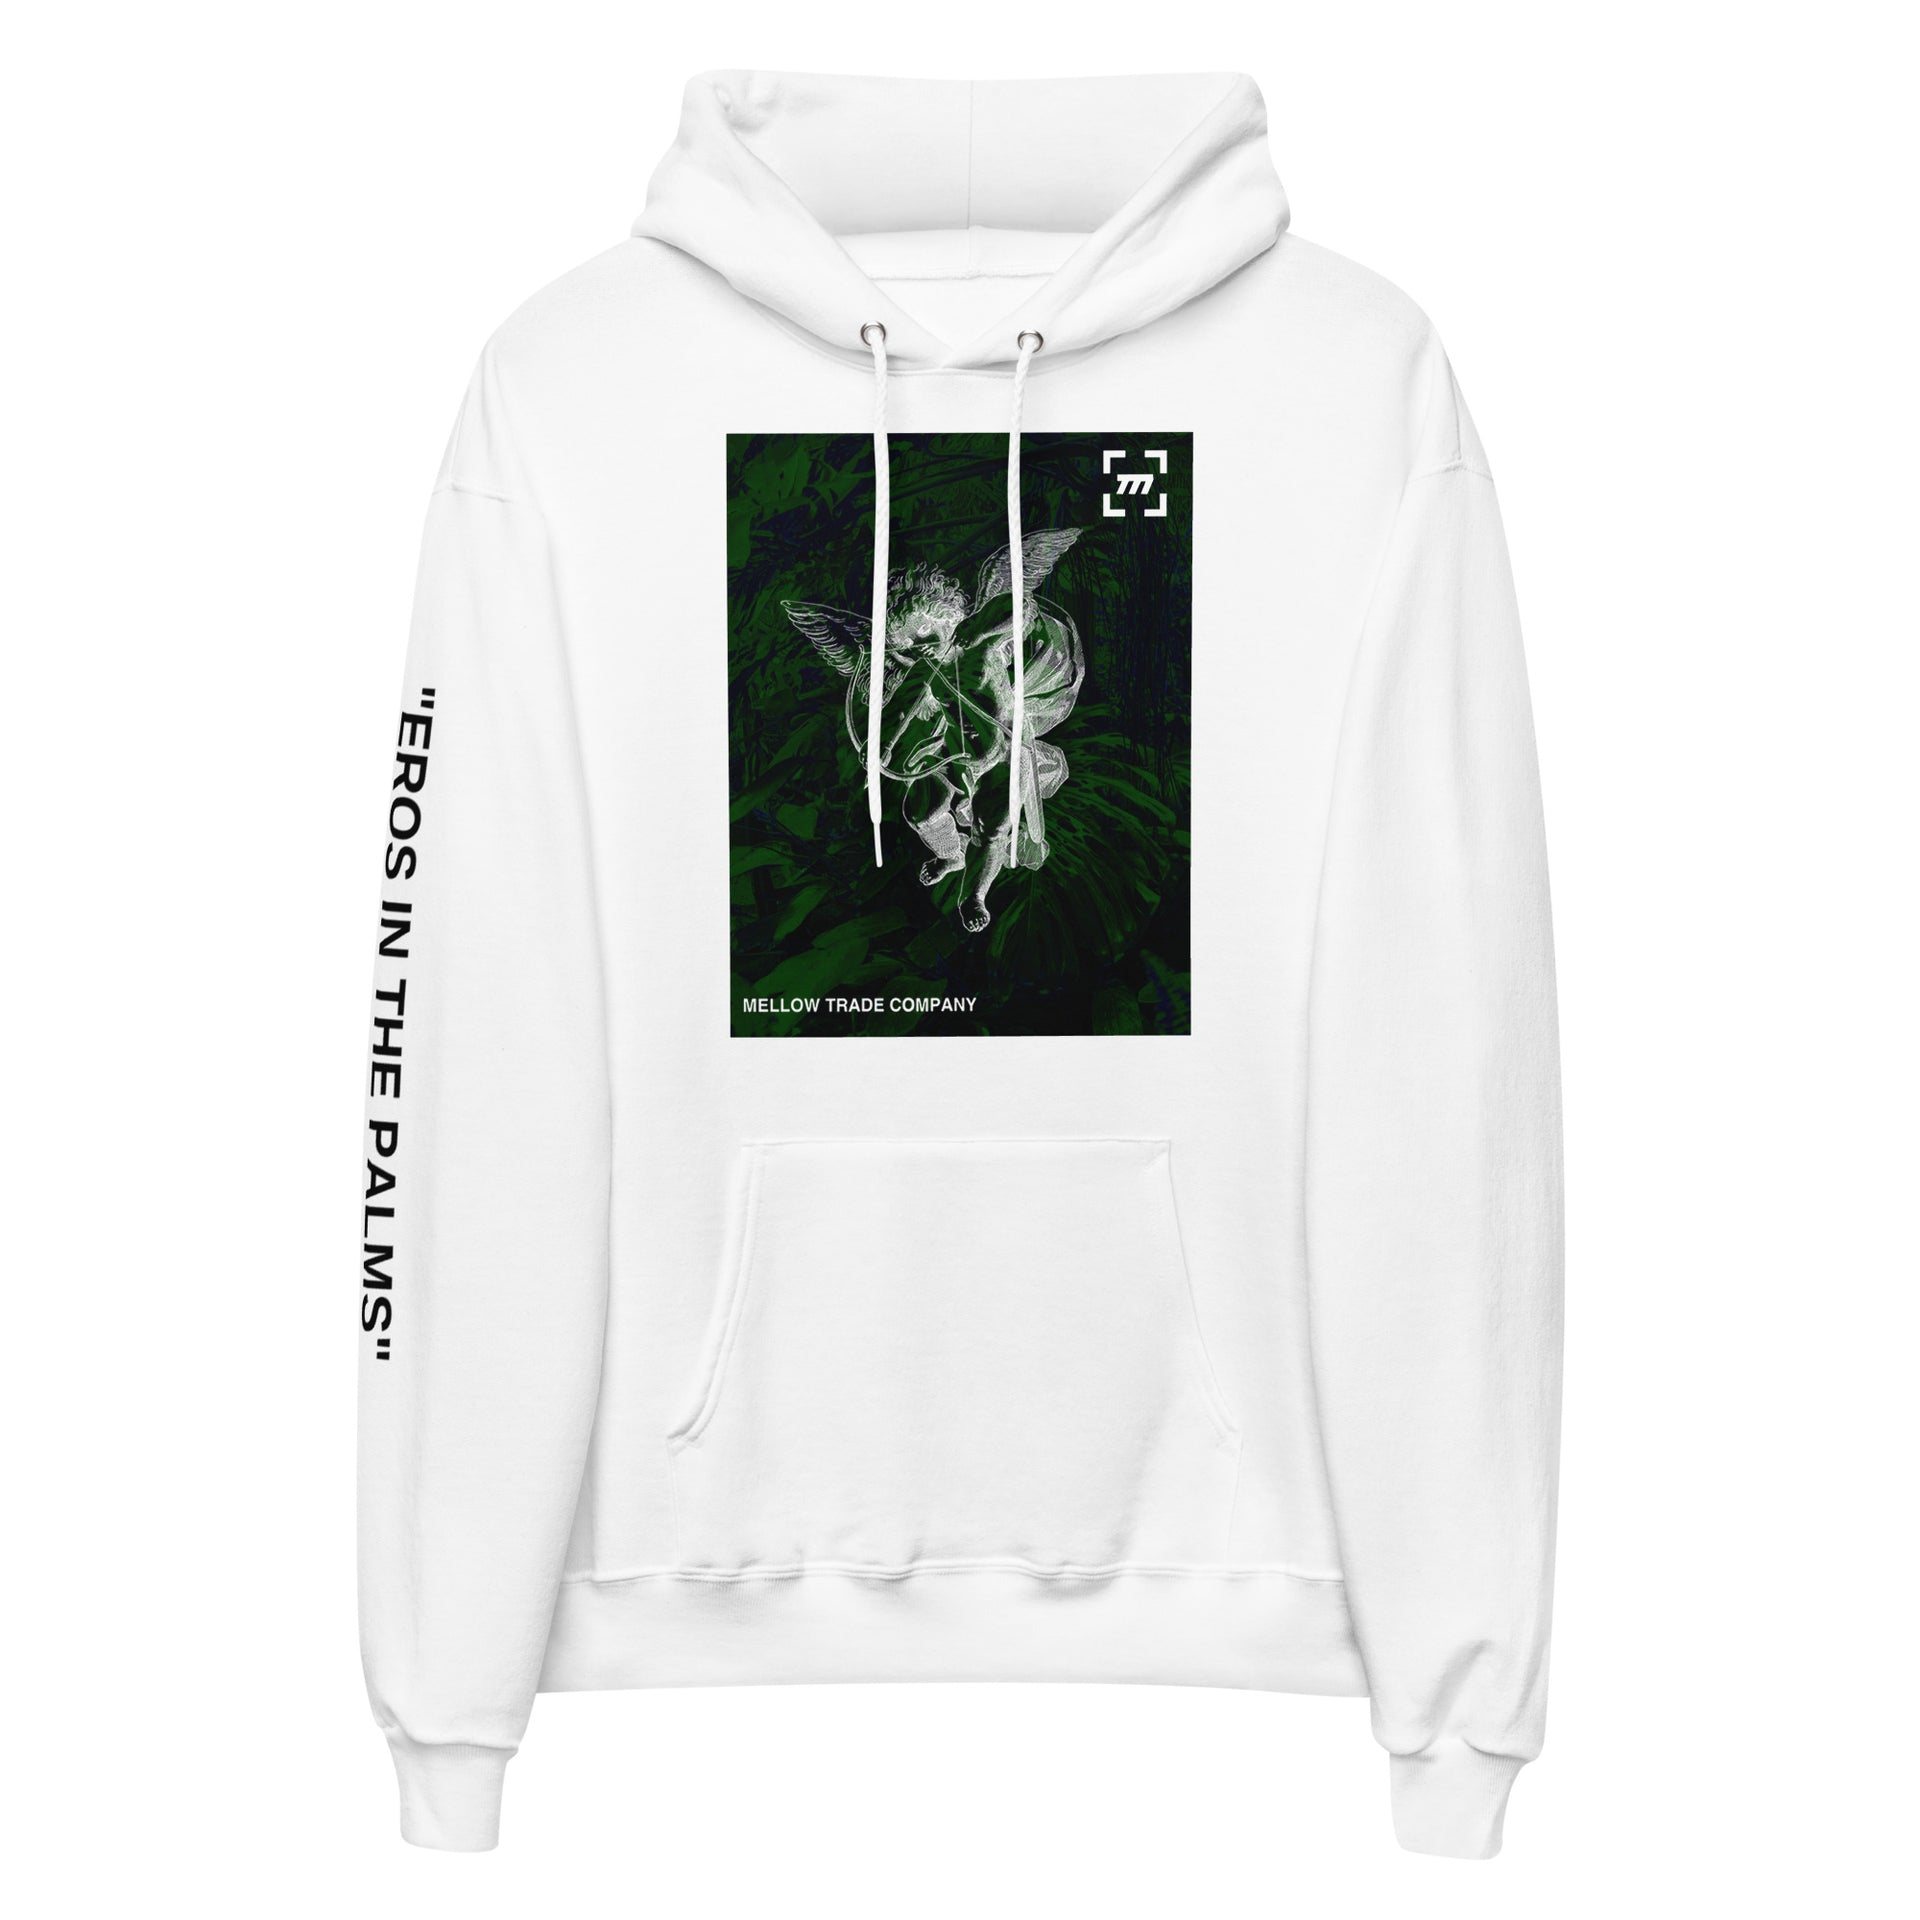 Eros in the Palms Graphic Hoodie